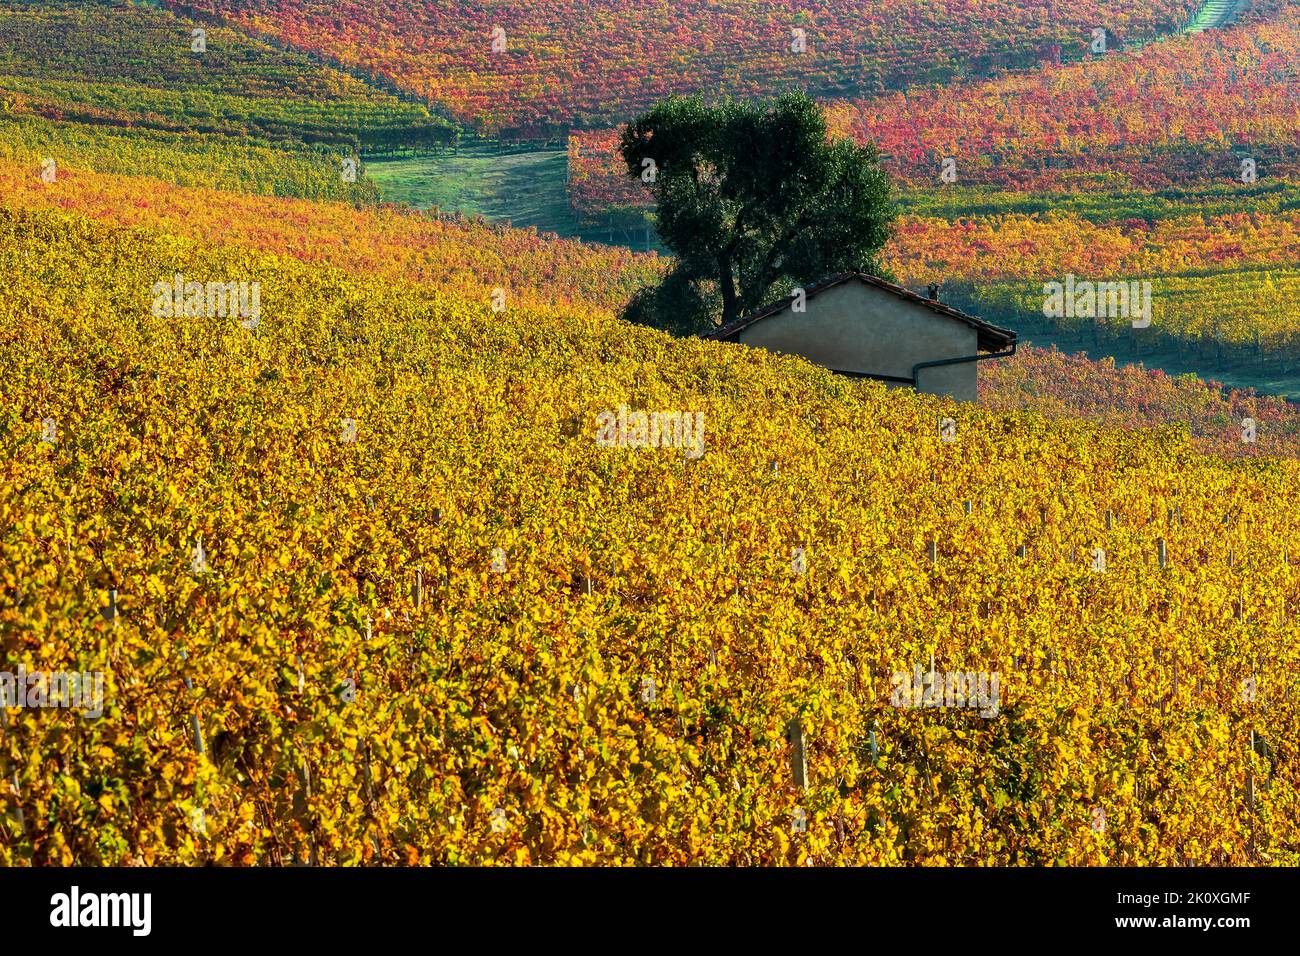 View of yellow and orange autumnal vineyards on the hills of Langhe in Piedmont, Northern Italy. Stock Photo